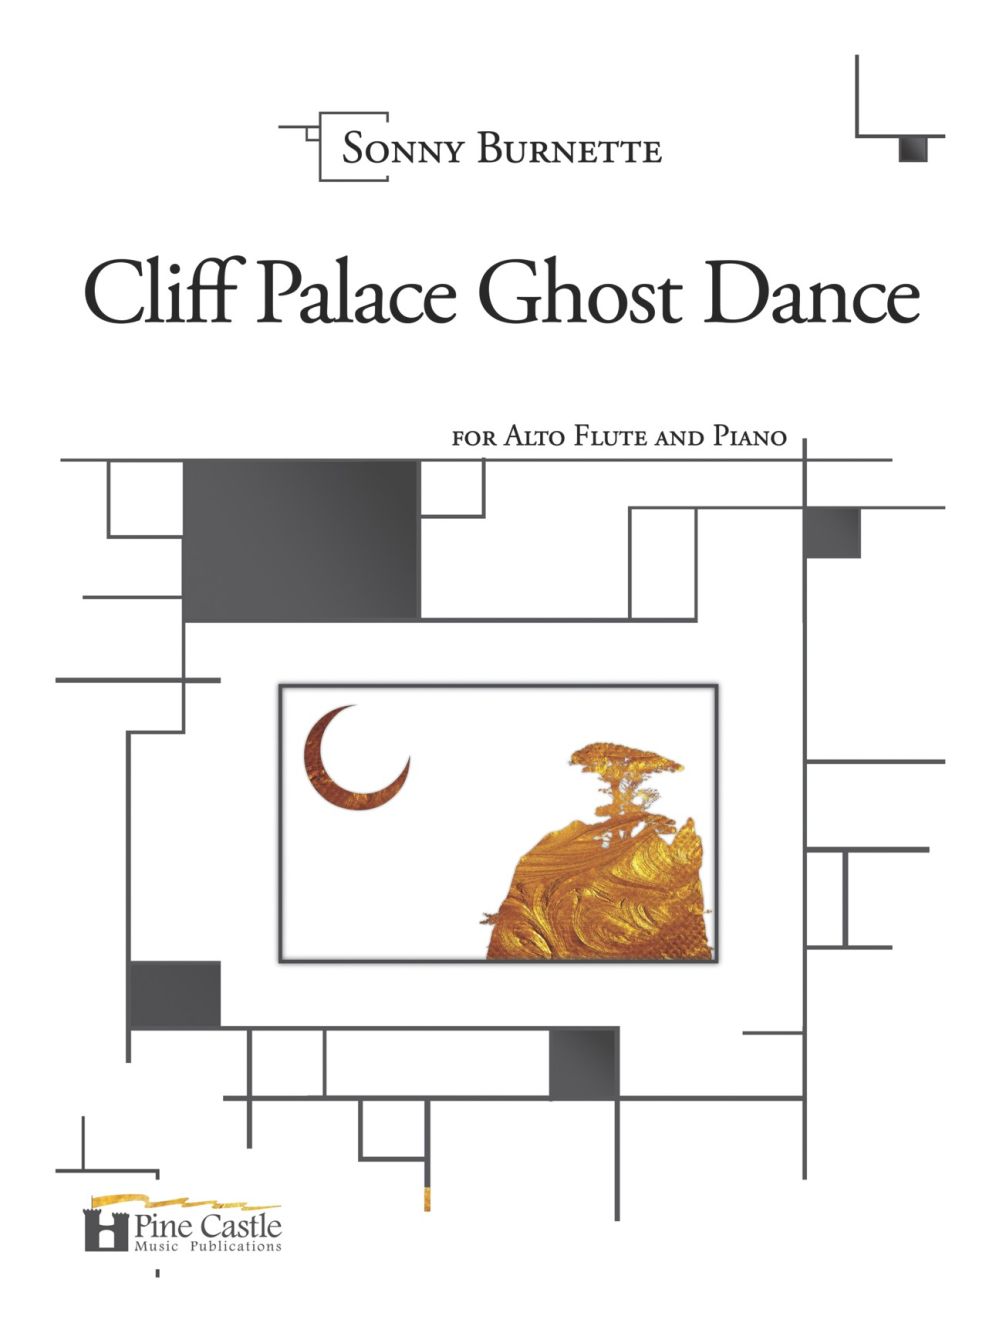 Cliff Palace Ghost Dance For Alto Flute And Piano (BURNETTE SONNY)